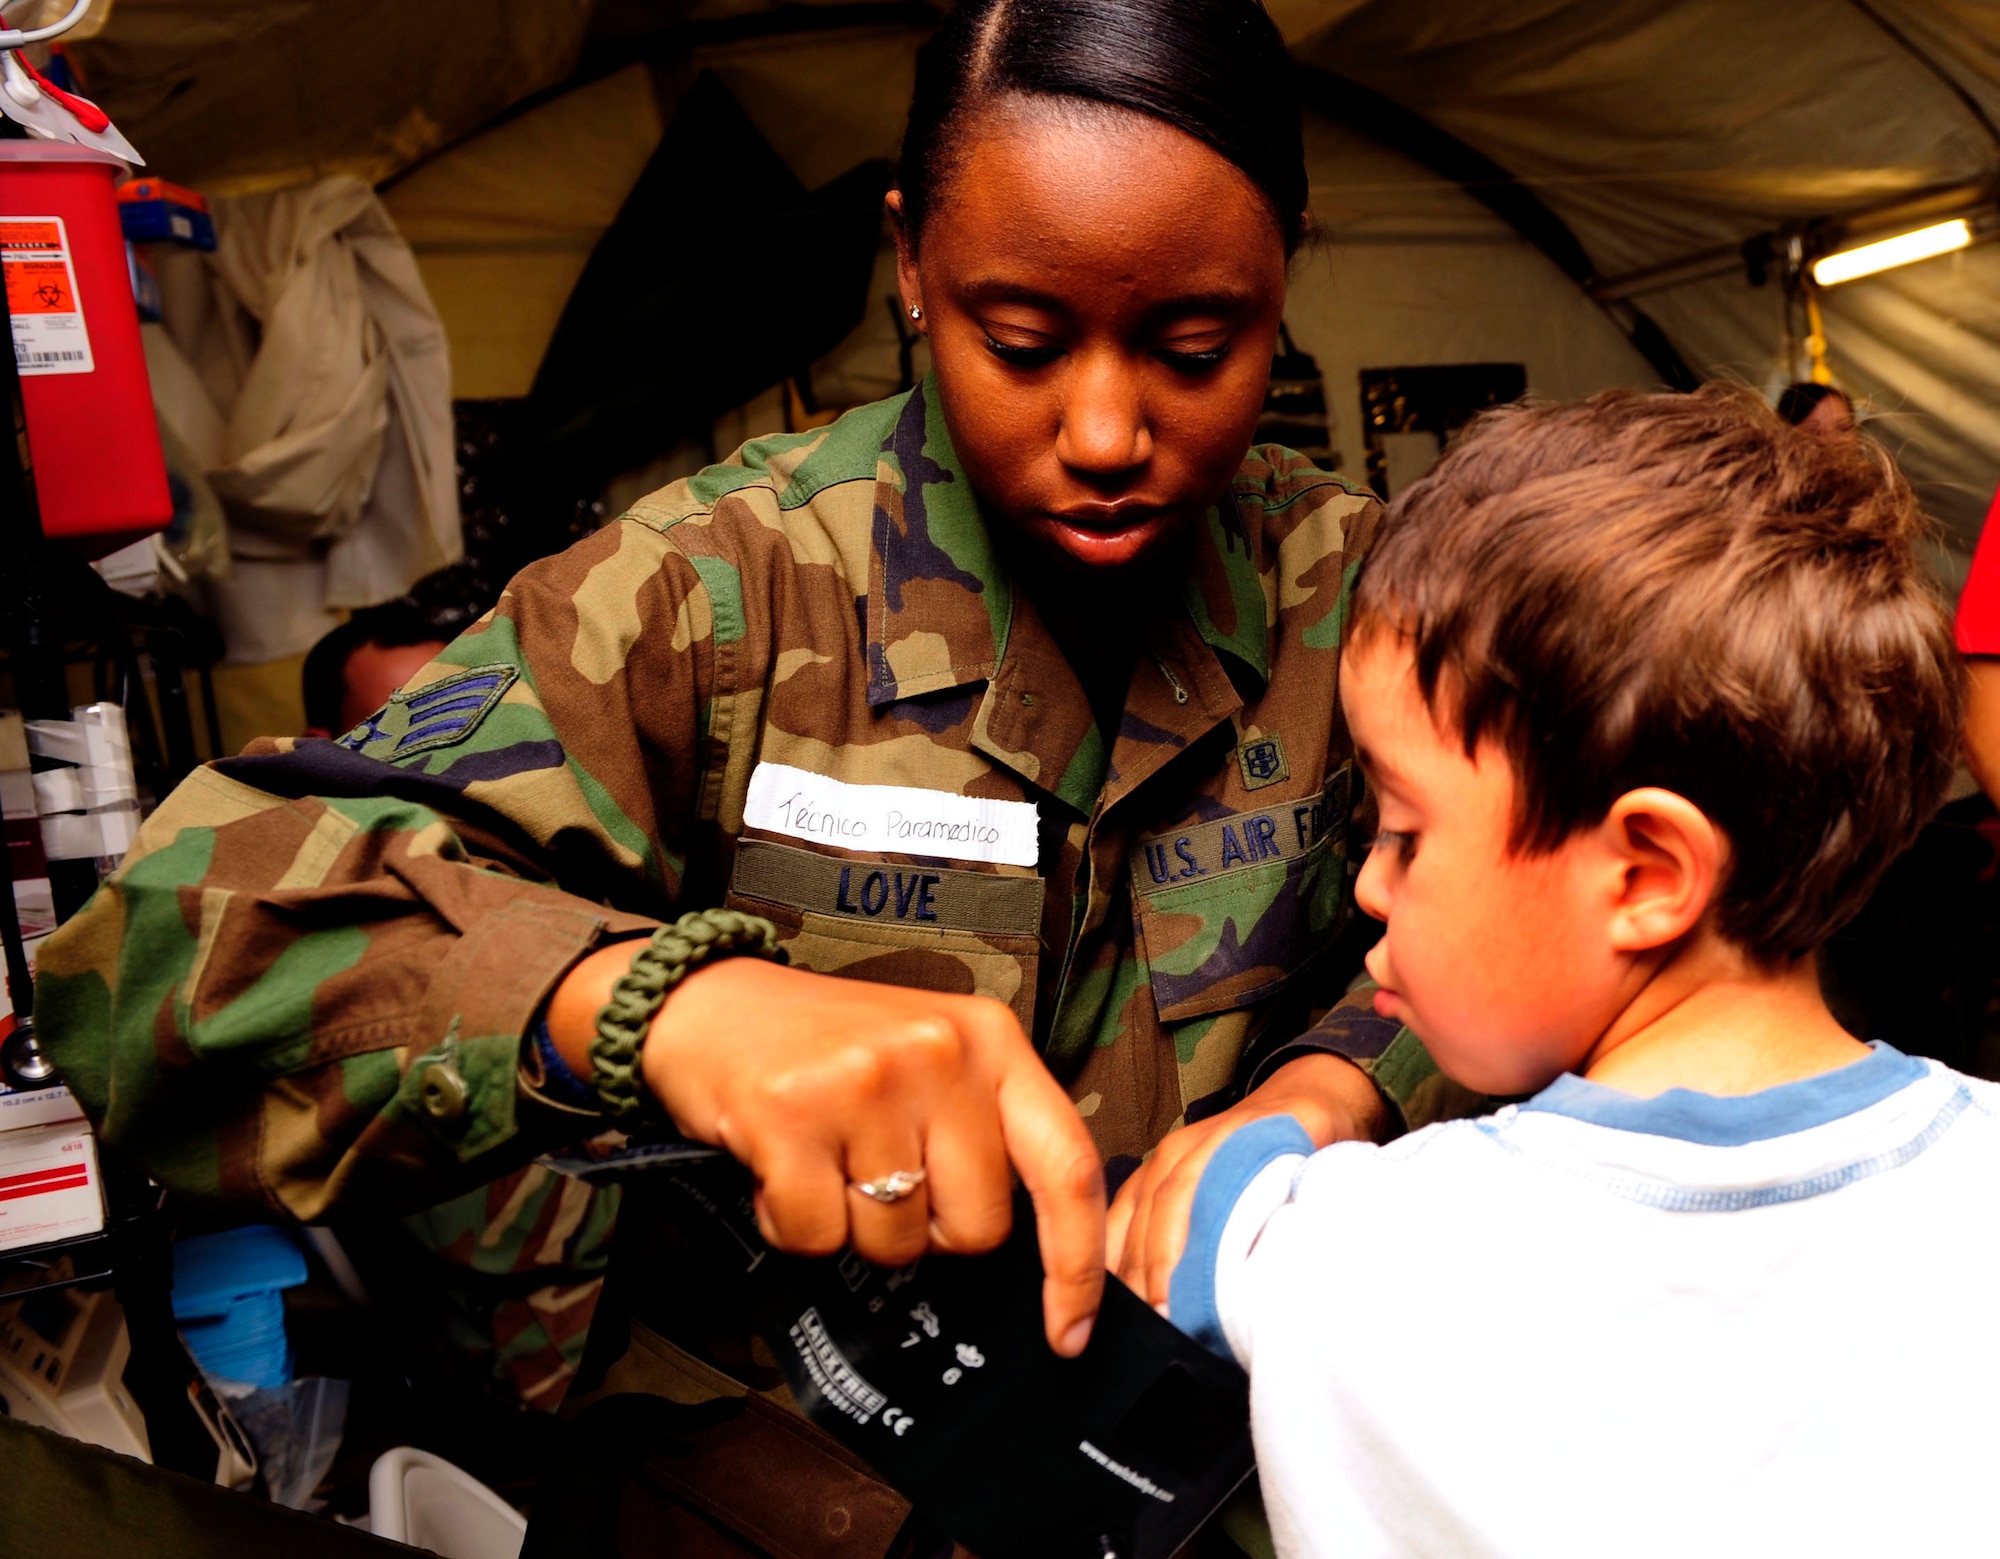 Senior Airman Kahliha Love checks the vital signs of a Chilean child at the expeditionary hospital March 20, 2010, in Angol, Chile. About 60 medical Airmen are working alongside local Chilean medics to provide support to meet the daily medical needs of the 110,000 people in the region. The local hospital in Angol was deemed structurally unsound after an 8.8-magnitude earthquake Feb. 27, 2010. Airman Love is an aerospace medical technician assigned to the 81st Medical Operating Squadron at Keesler Air Force Base, Miss. (U.S. Air Force photo/Senior Airman Tiffany Trojca)
